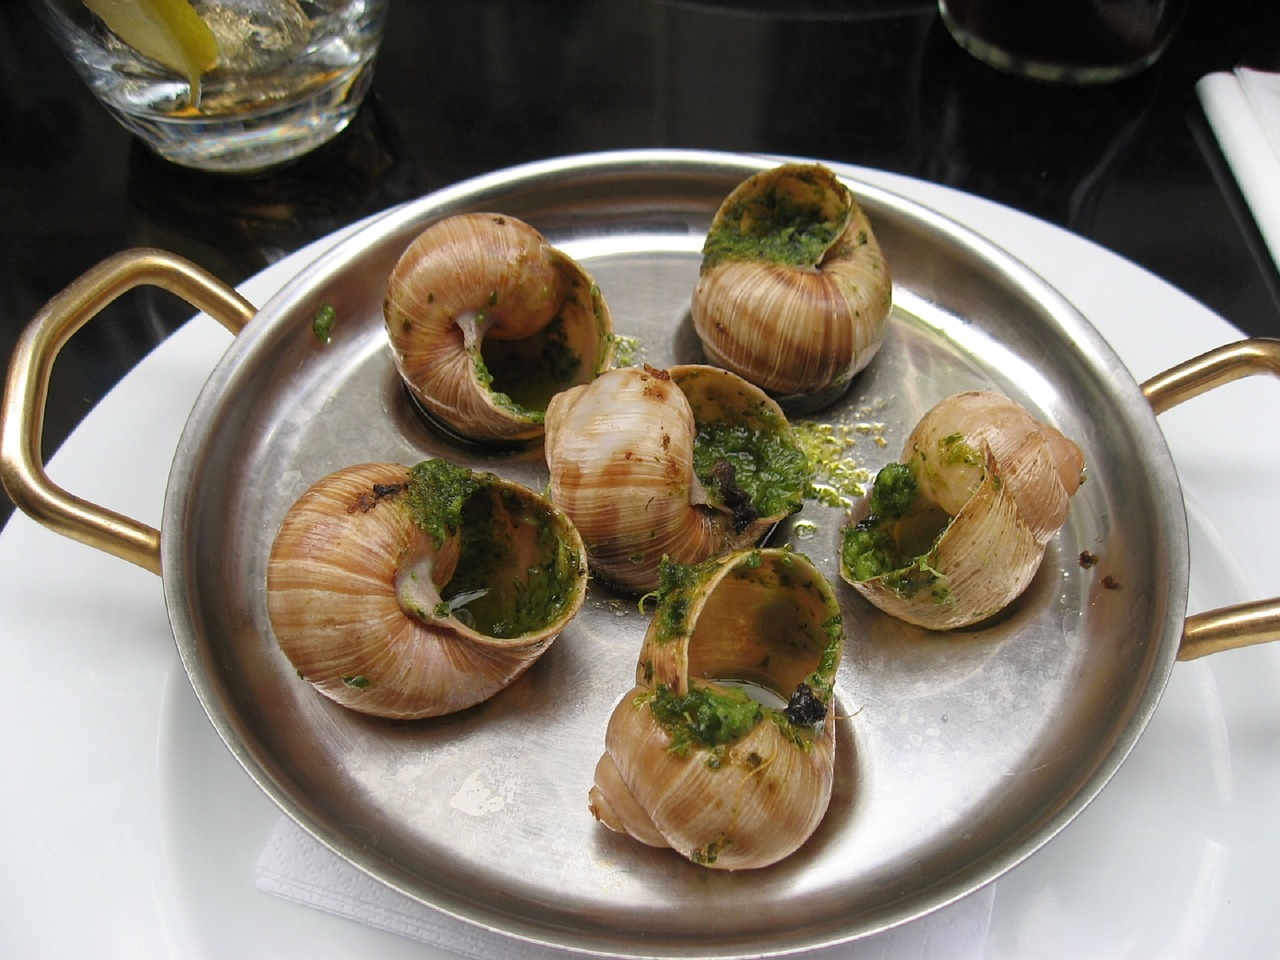 Classic French dish - Snails